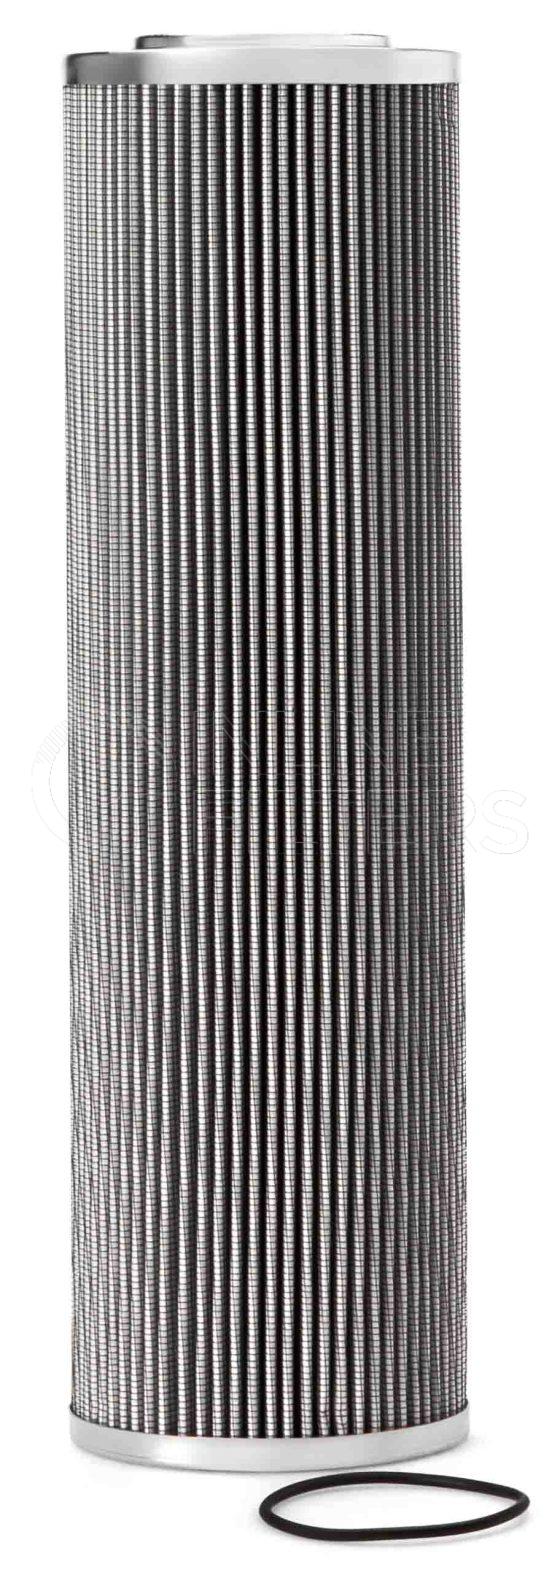 Fleetguard HF30282. Hydraulic Filter Product – Brand Specific Fleetguard – Cartridge Product Fleetguard filter product Hydraulic Filter. Main Cross Reference is Pall HC8900FKS13H. Particle Size at Beta 75: 9.5 micron (9.5 micron). Particle Size at Beta 200: 12 micron (12 micron). Fleetguard Part Type: HF